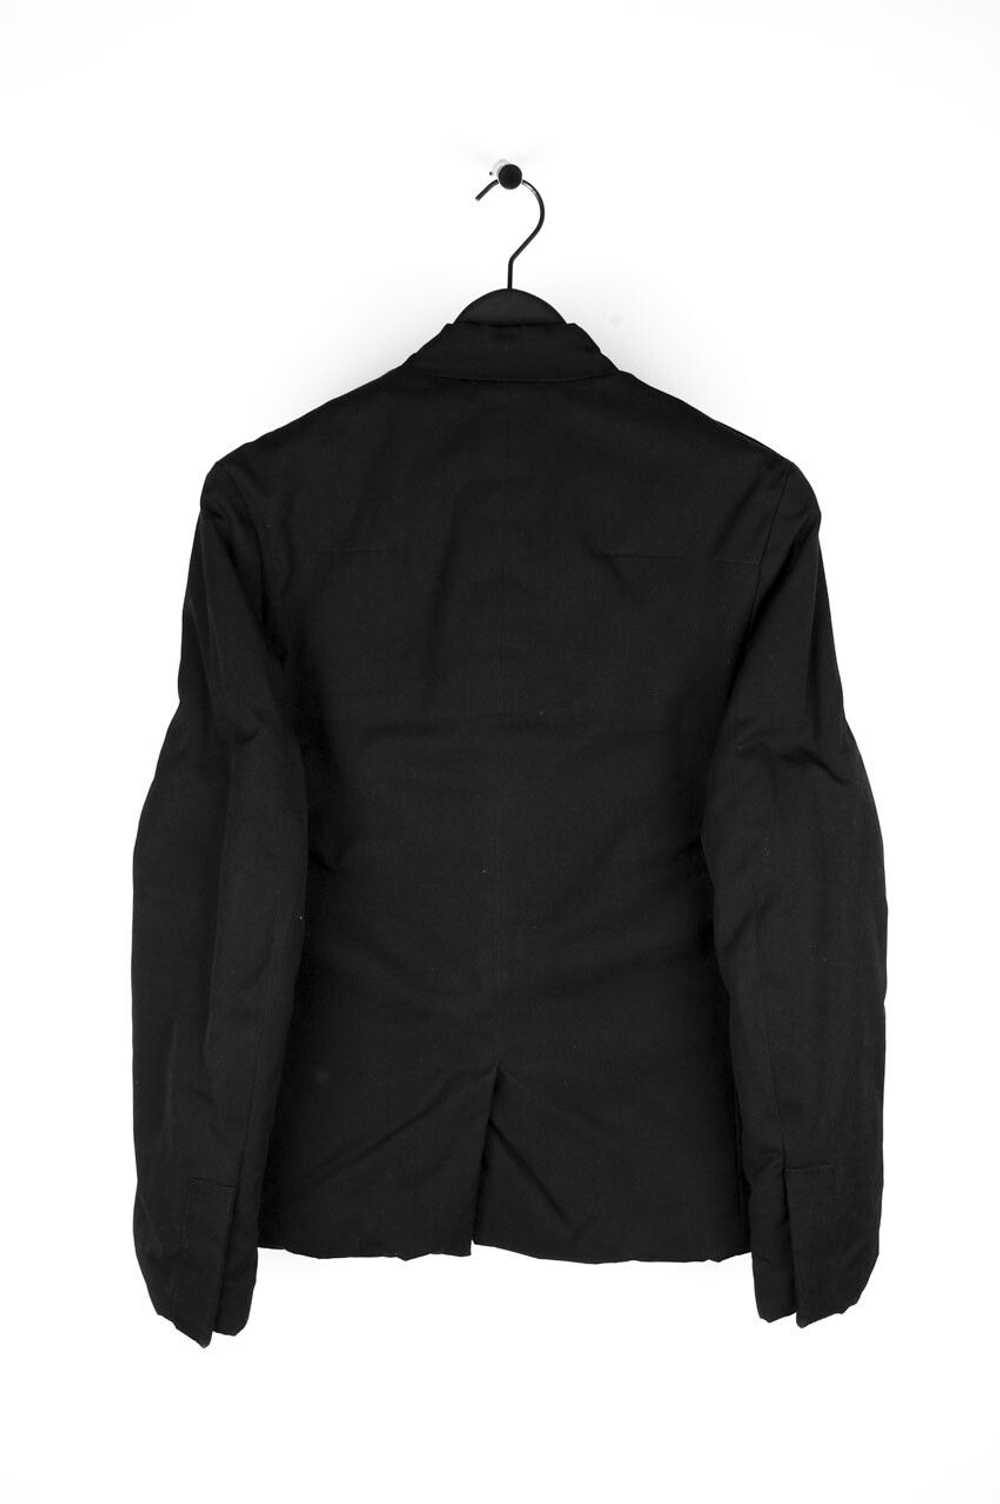 Dior Homme By Hedi Slimane AW03 Luster Bomber Jac… - image 5